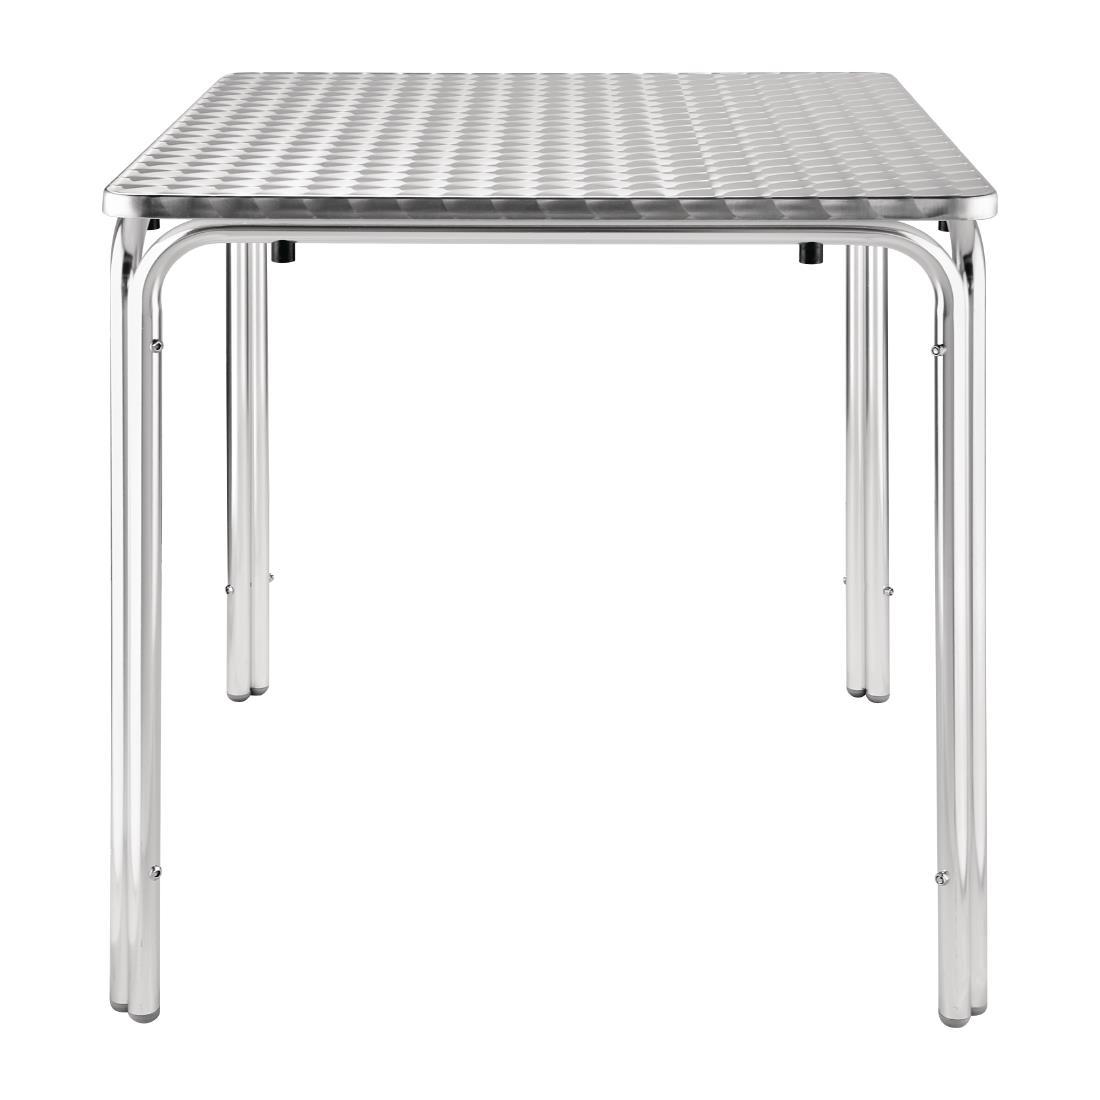 Bolero Square Stacking Table Stainless Steel 700mm - U505  - 1